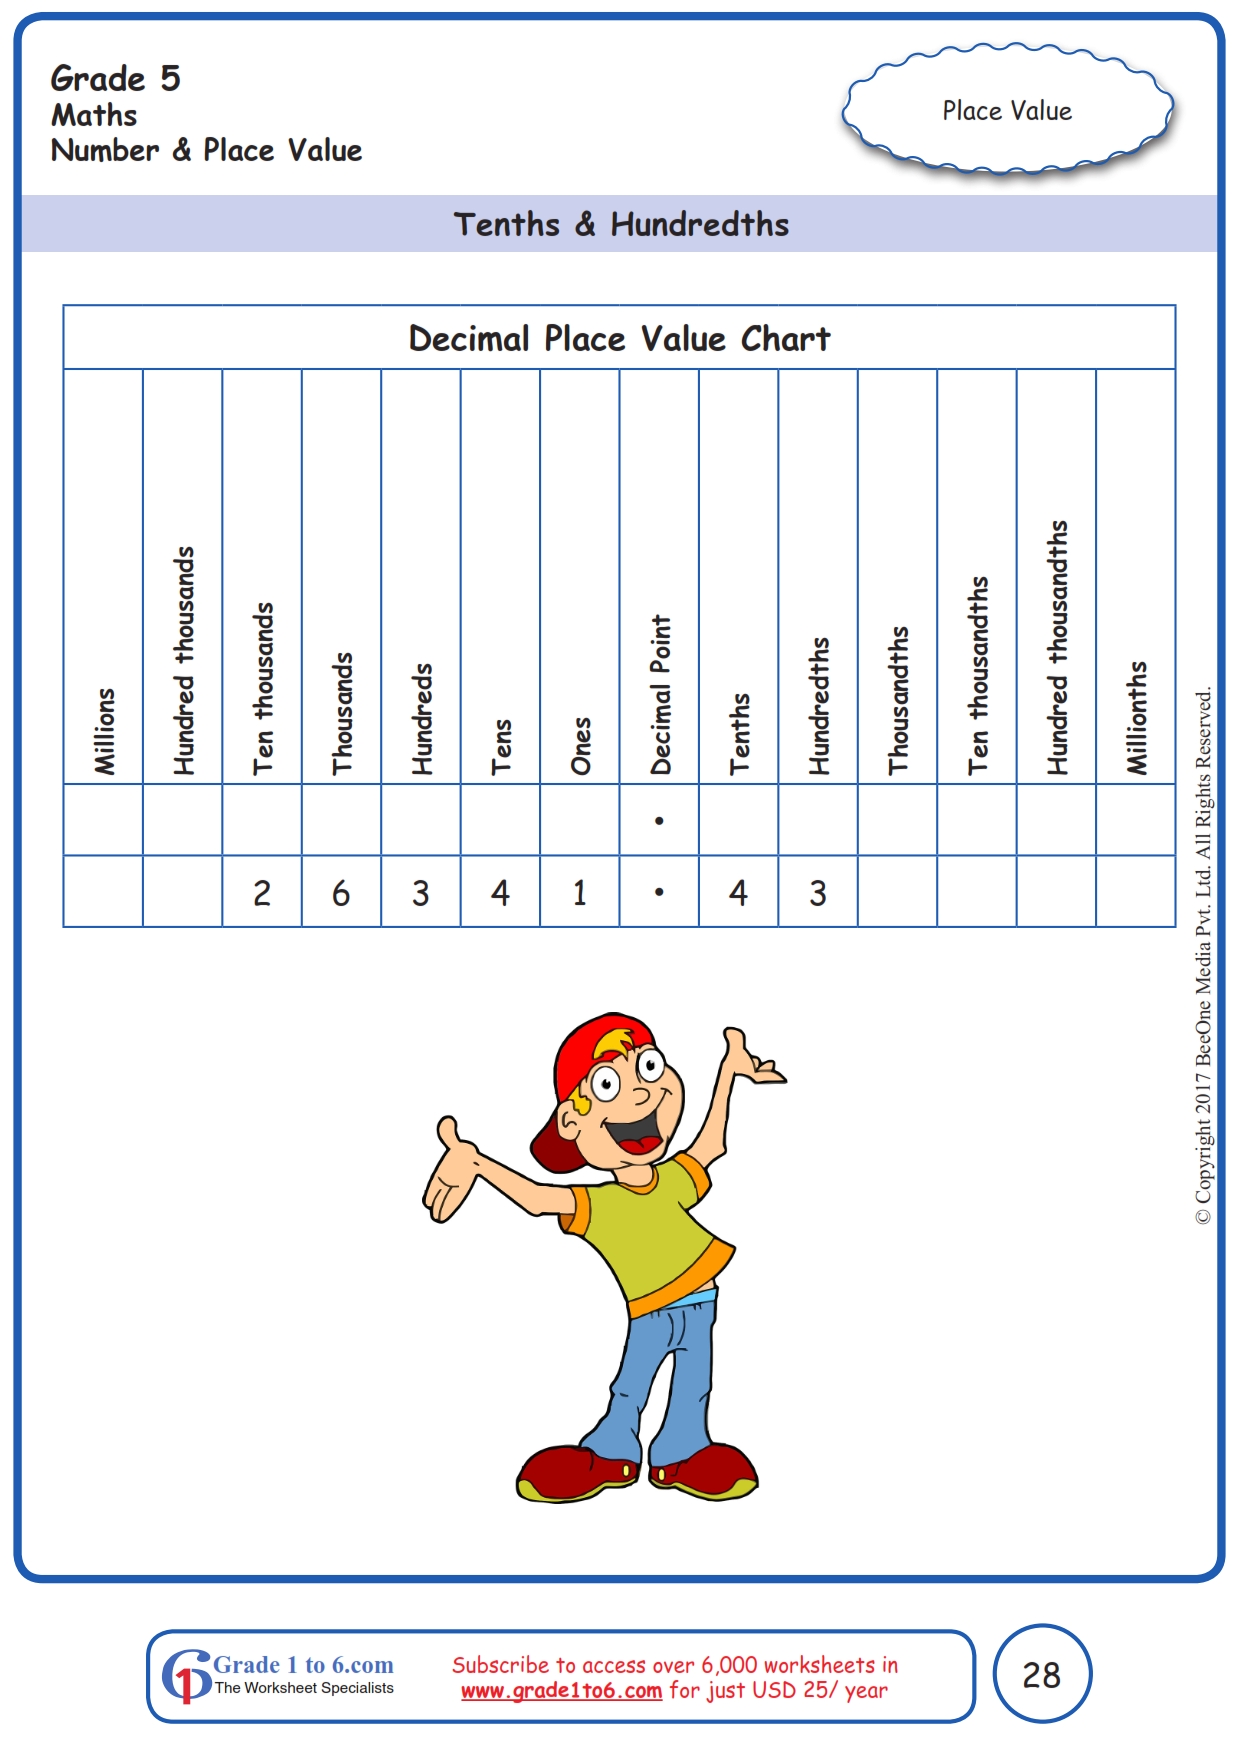 Decimal Place Value Worksheets: Grade 23 www.grade23to23.com With Rounding Decimals Worksheet 5th Grade